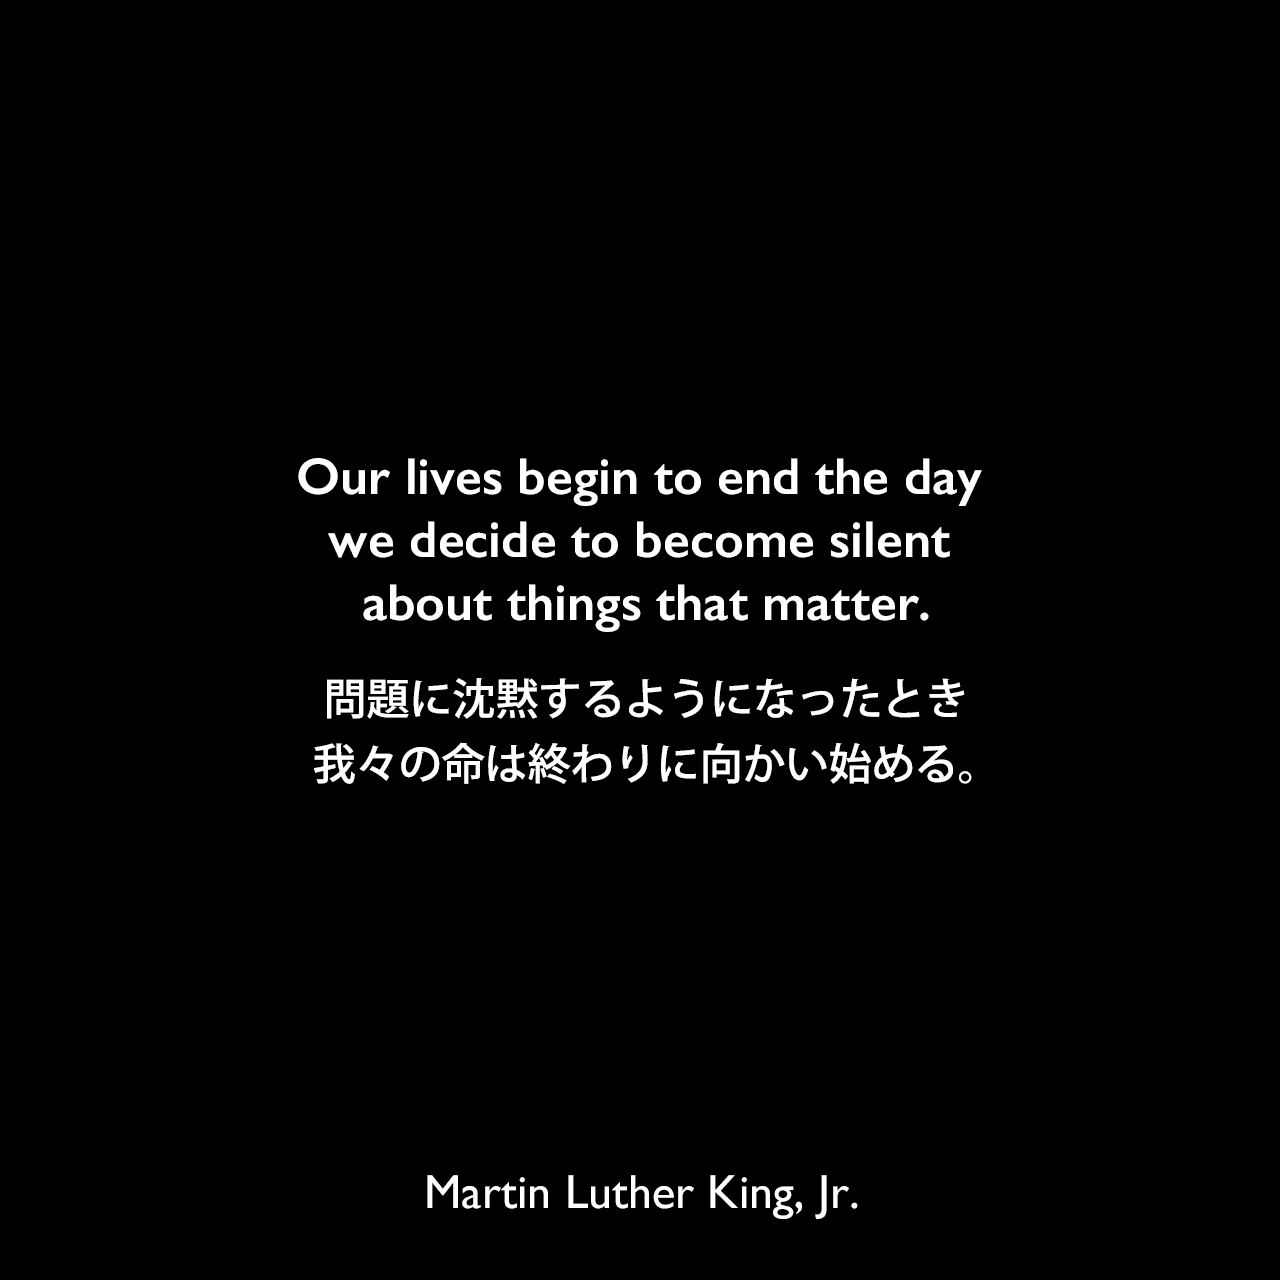 Our lives begin to end the day we decide to become silent about things that matter.問題に沈黙するようになったとき、我々の命は終わりに向かい始める。Martin Luther King, Jr.